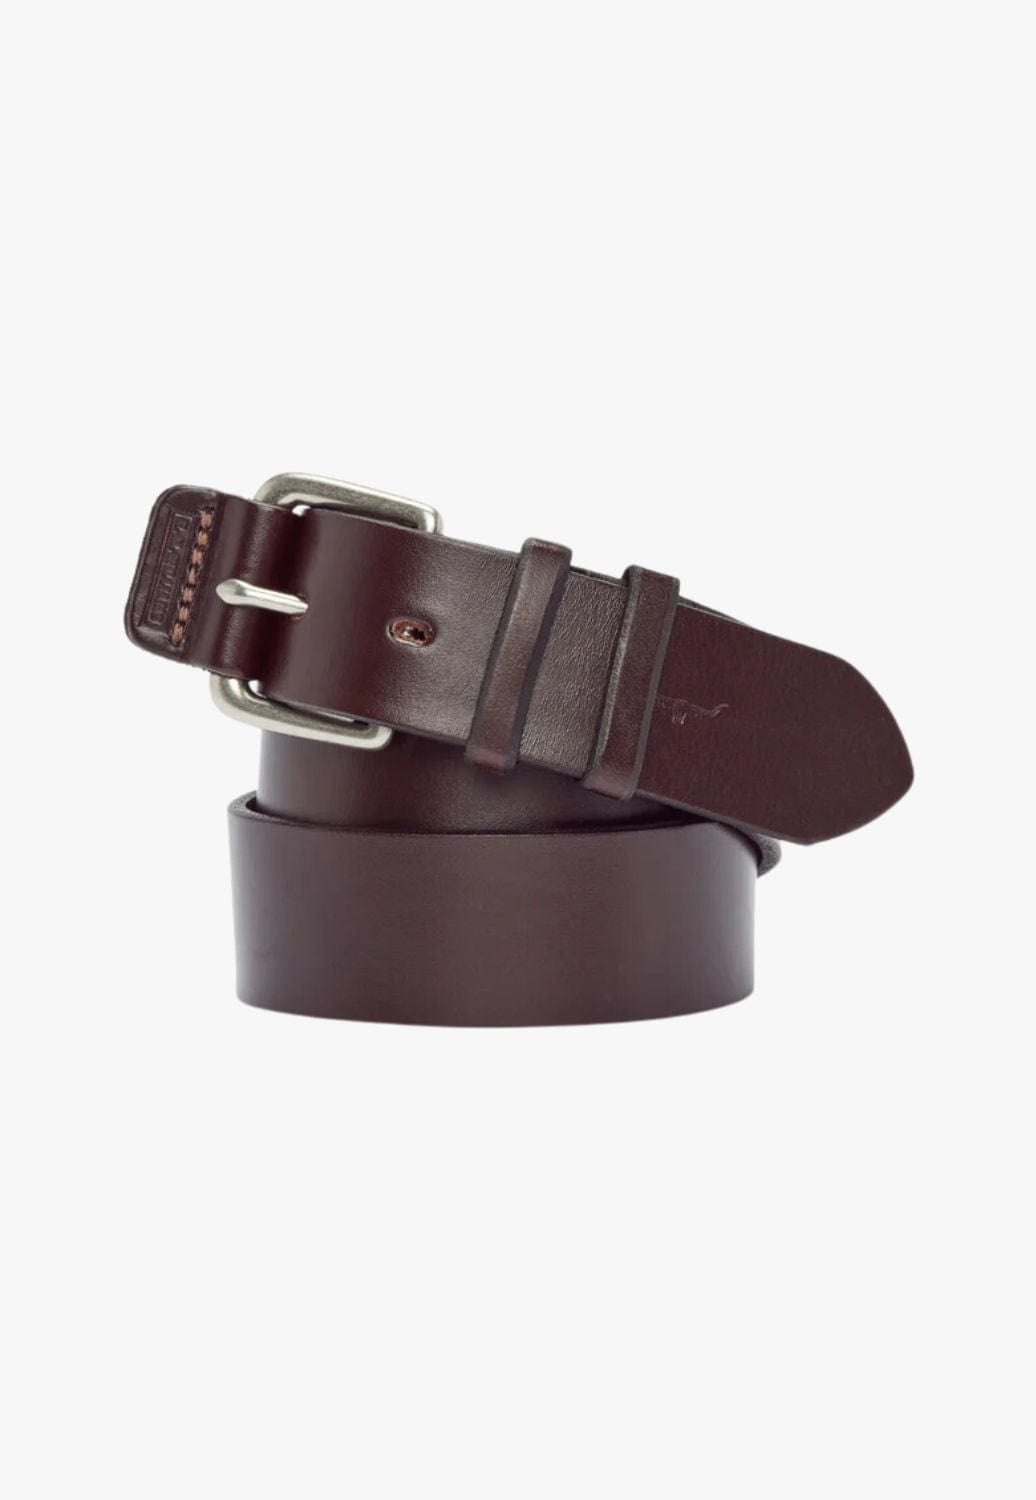 R.M. Williams CLOTHING-Mens Belts & Braces RM Williams 1 1/2inch Covered Buckle Belt